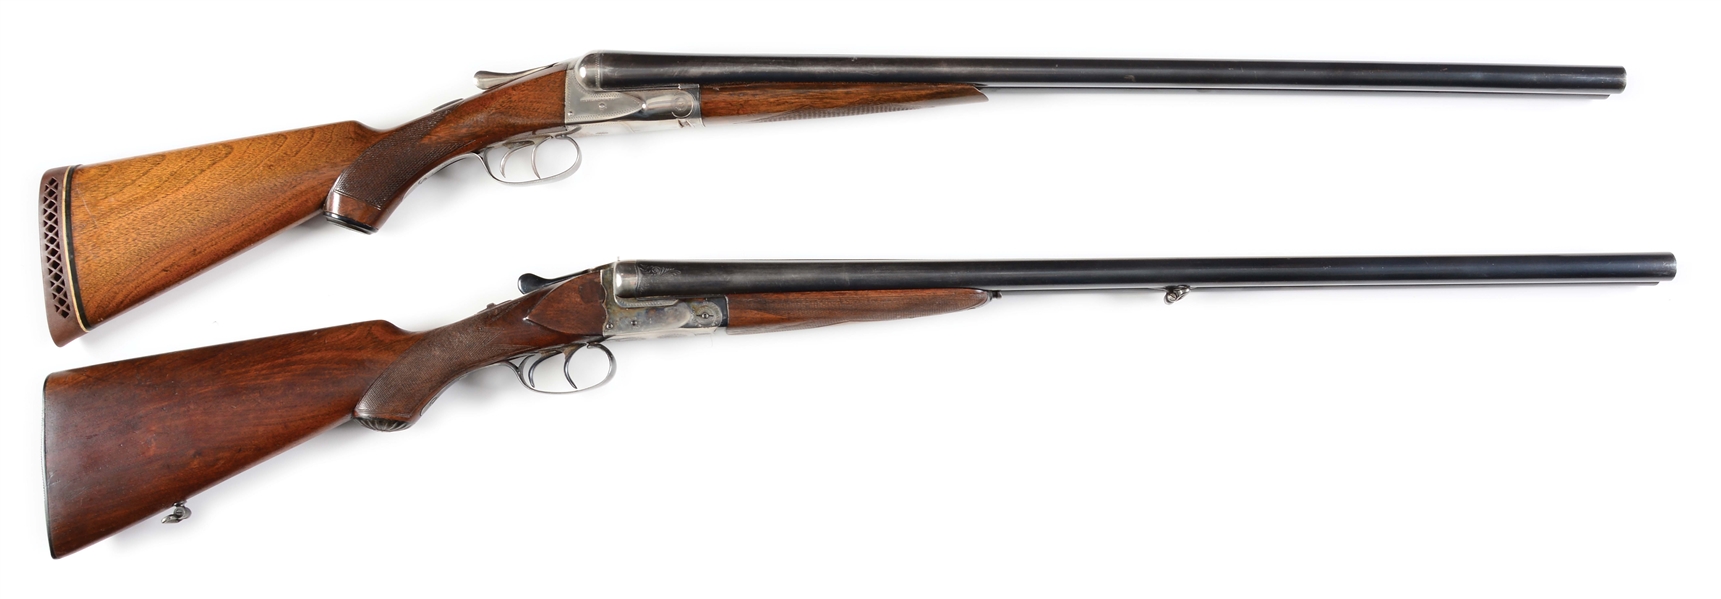 (C) LOT OF TWO: A.H. FOX AND MODELL SIDE BY SIDE SHOTGUNS.